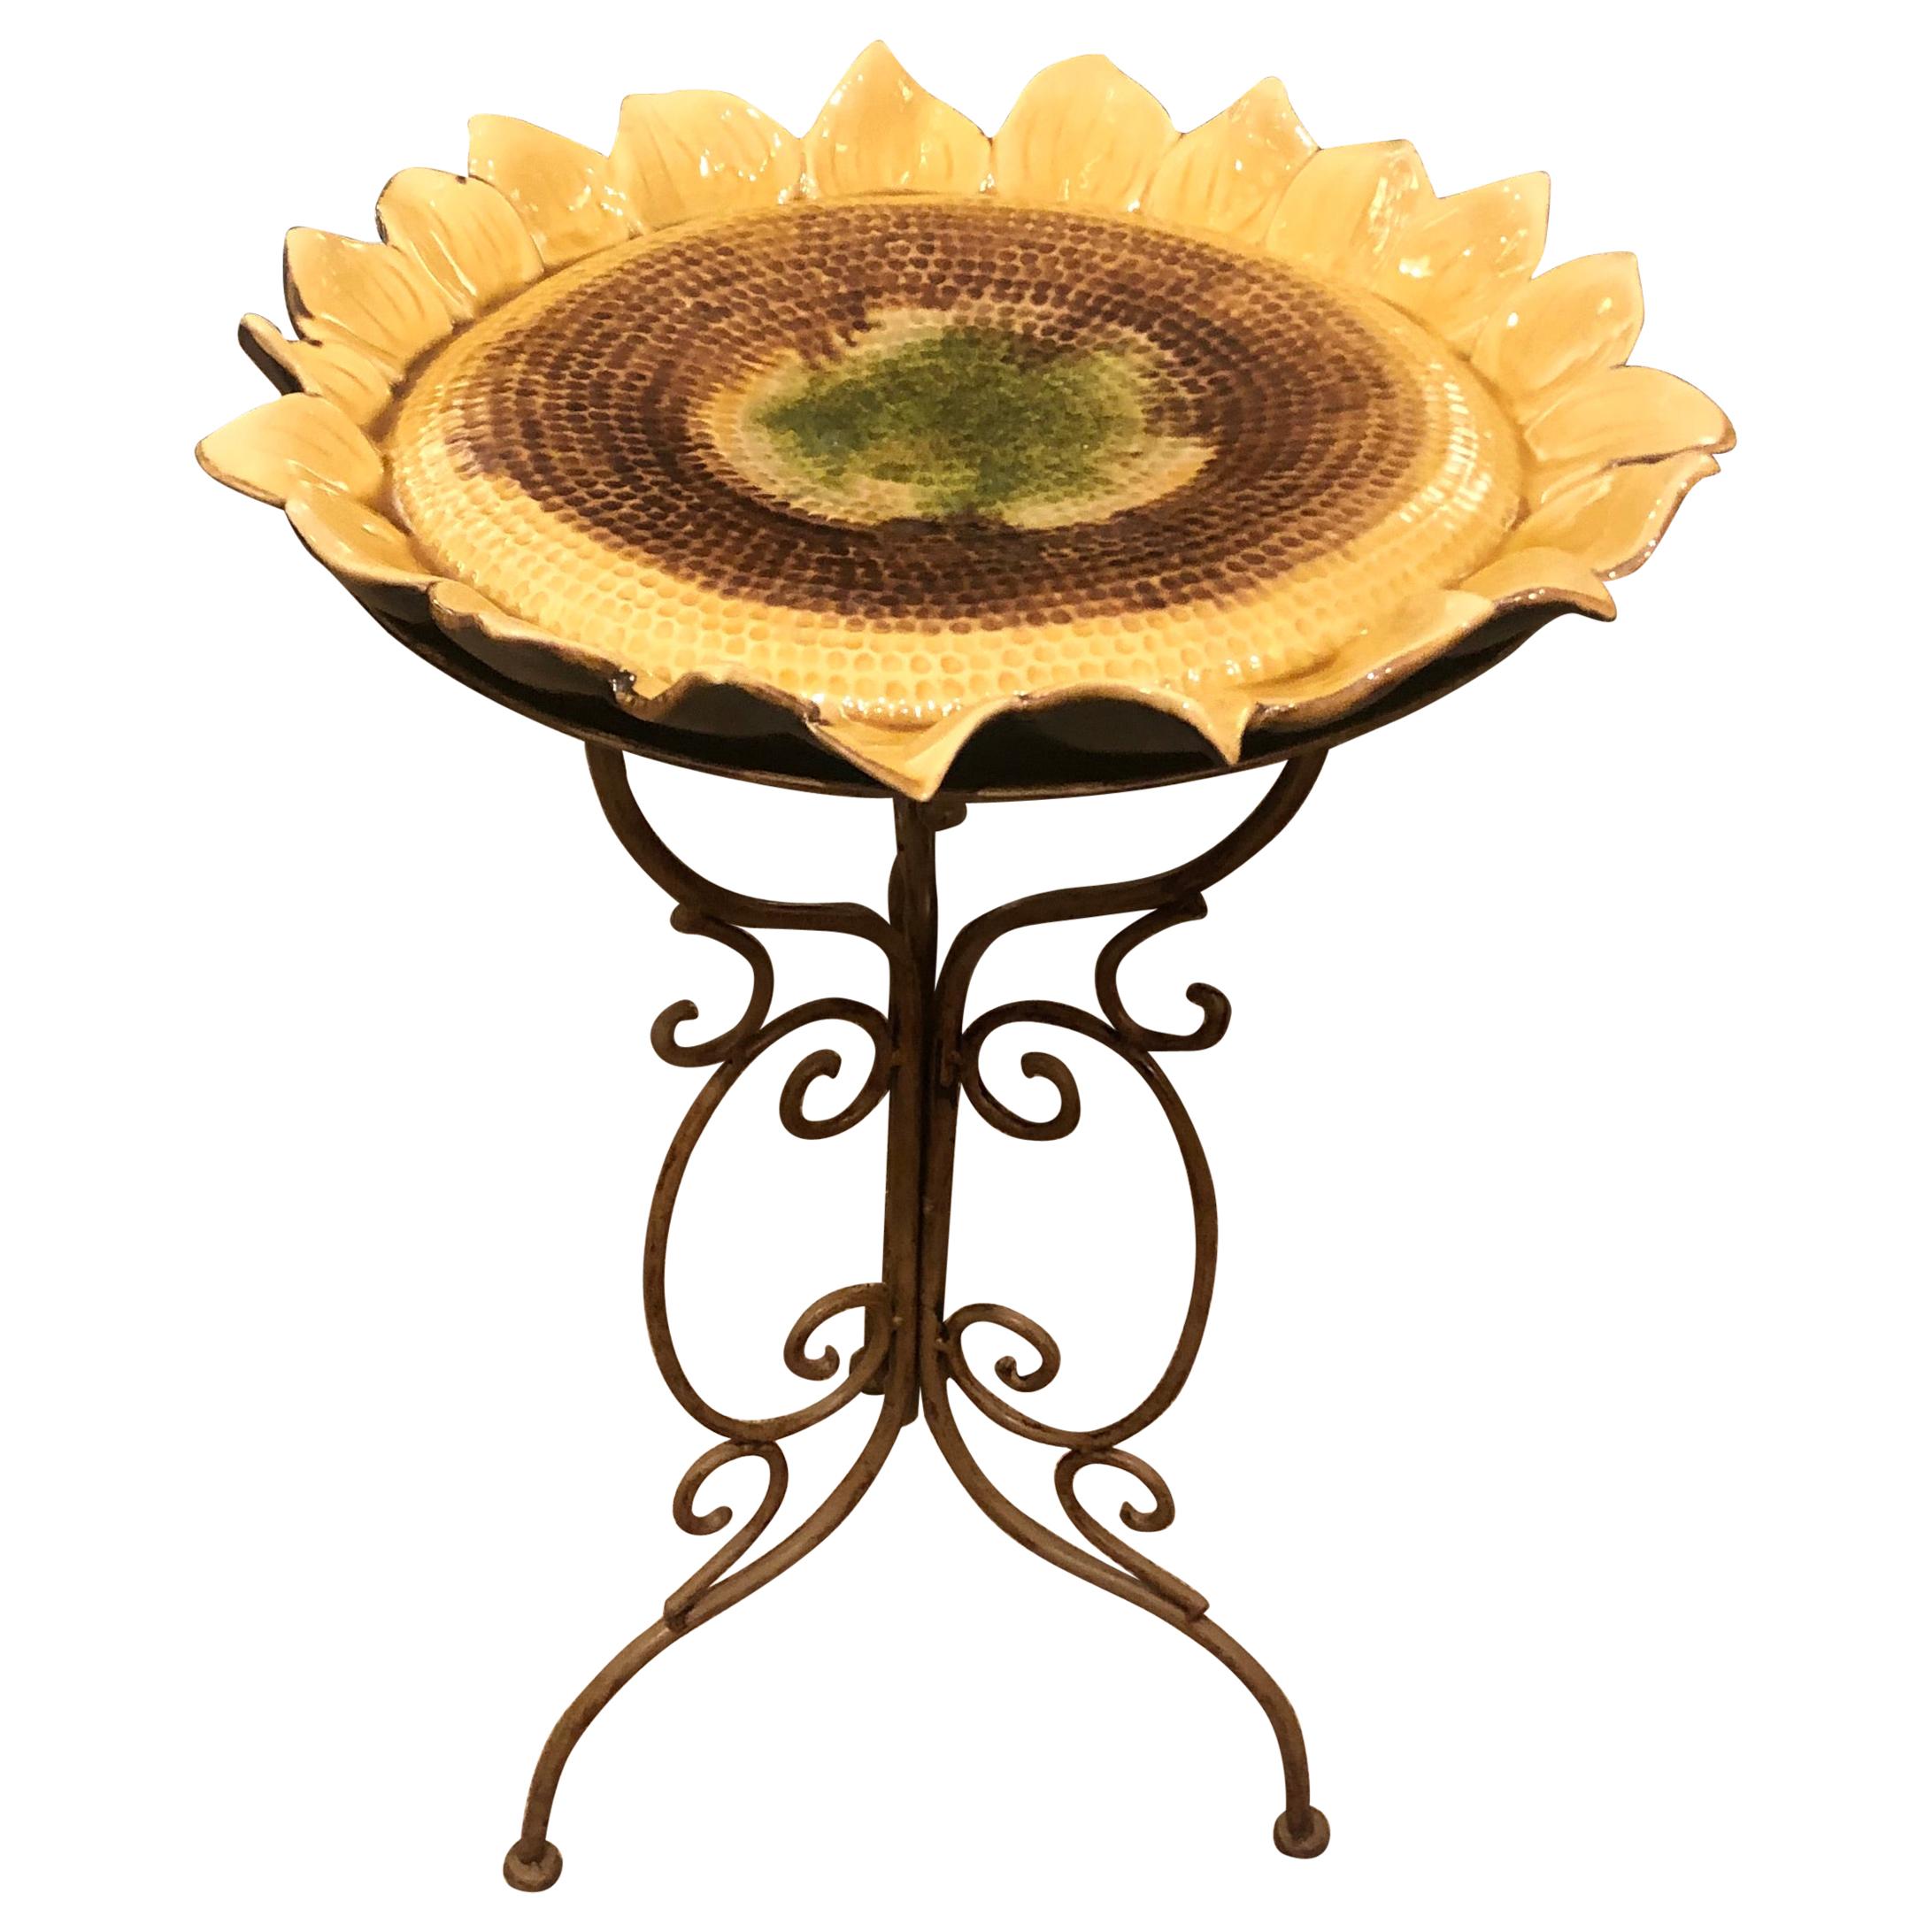 Darling Ceramic Sunflower Side Table with Iron Base